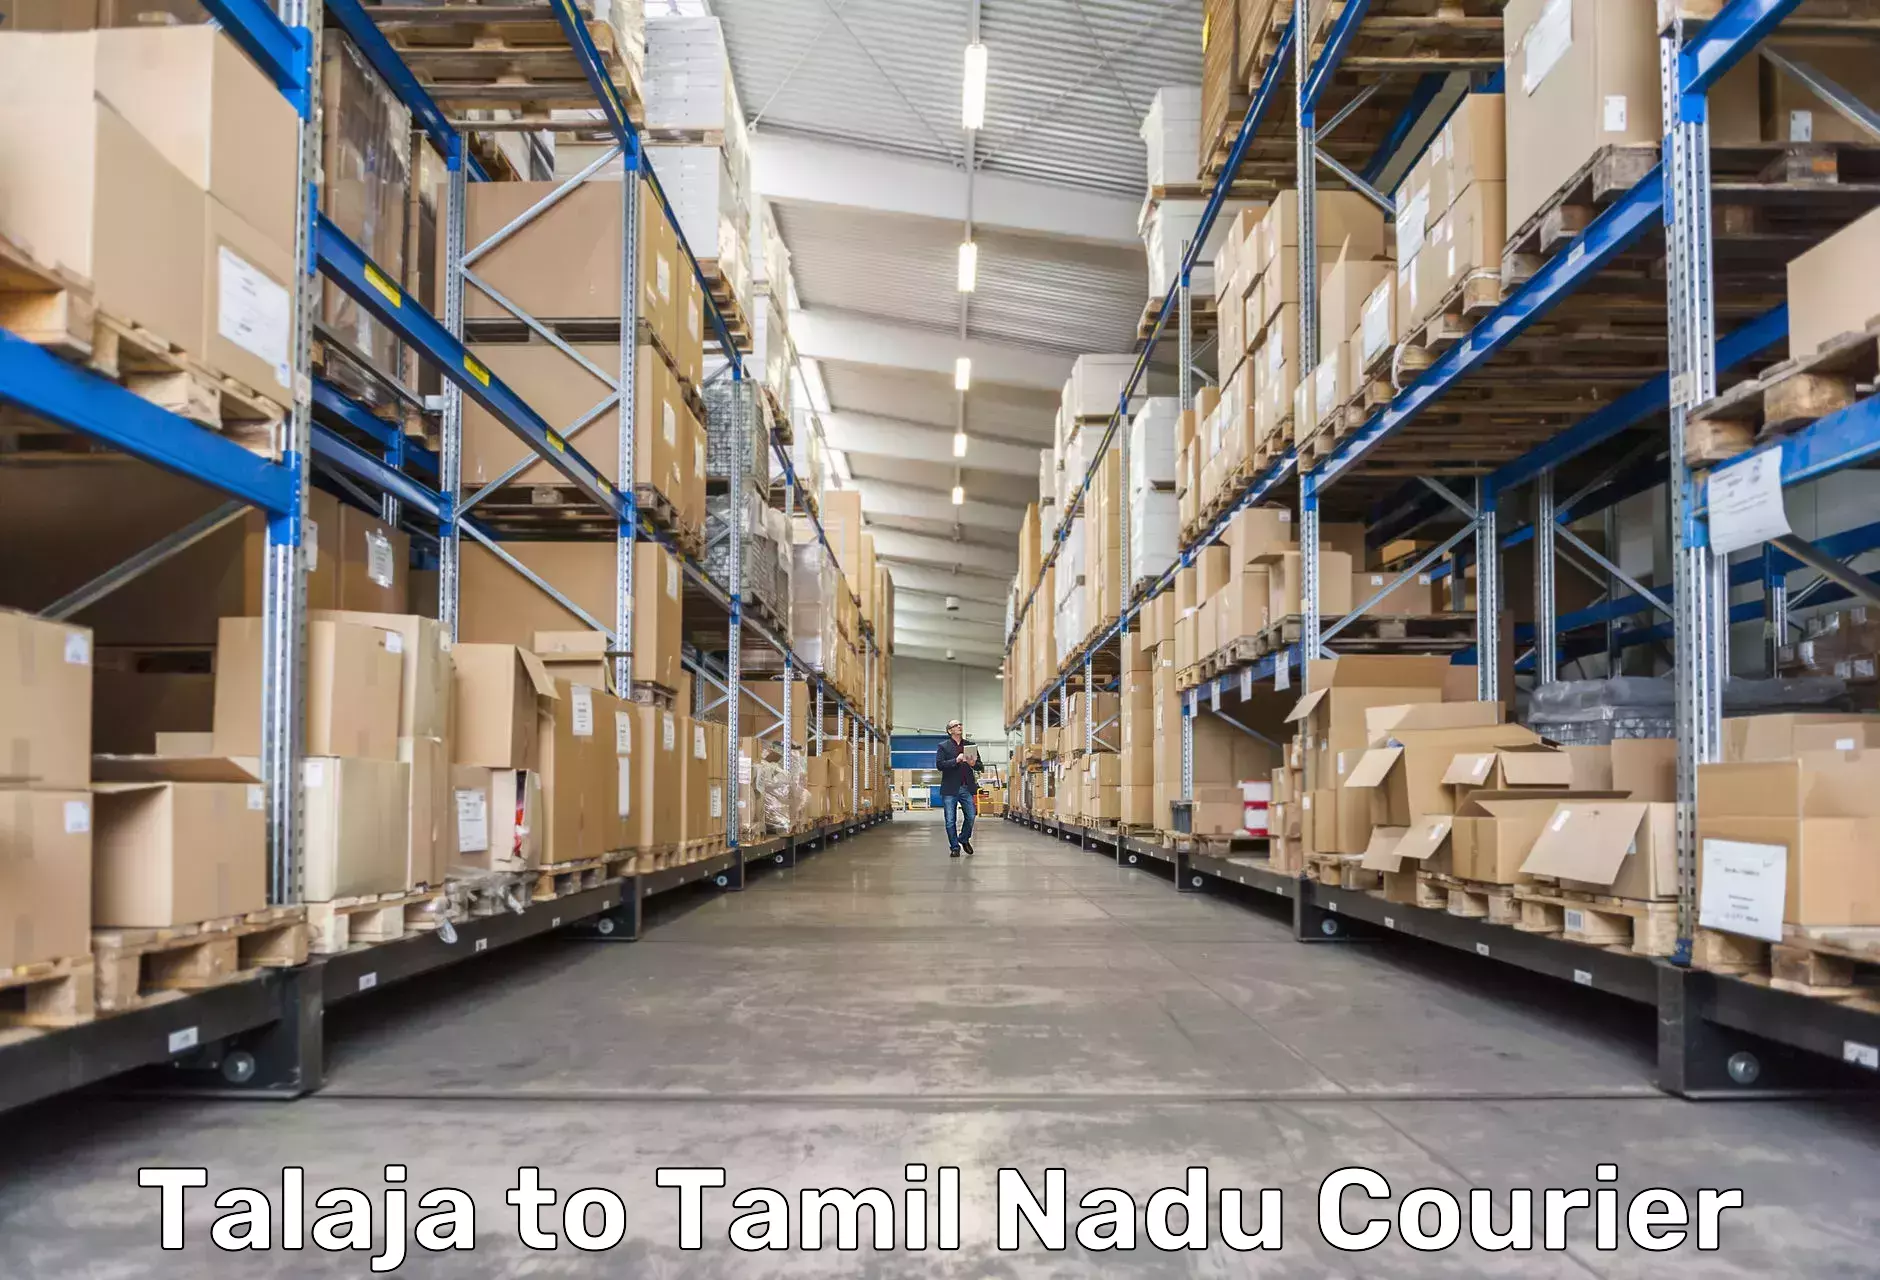 On-call courier service Talaja to Tamil Nadu